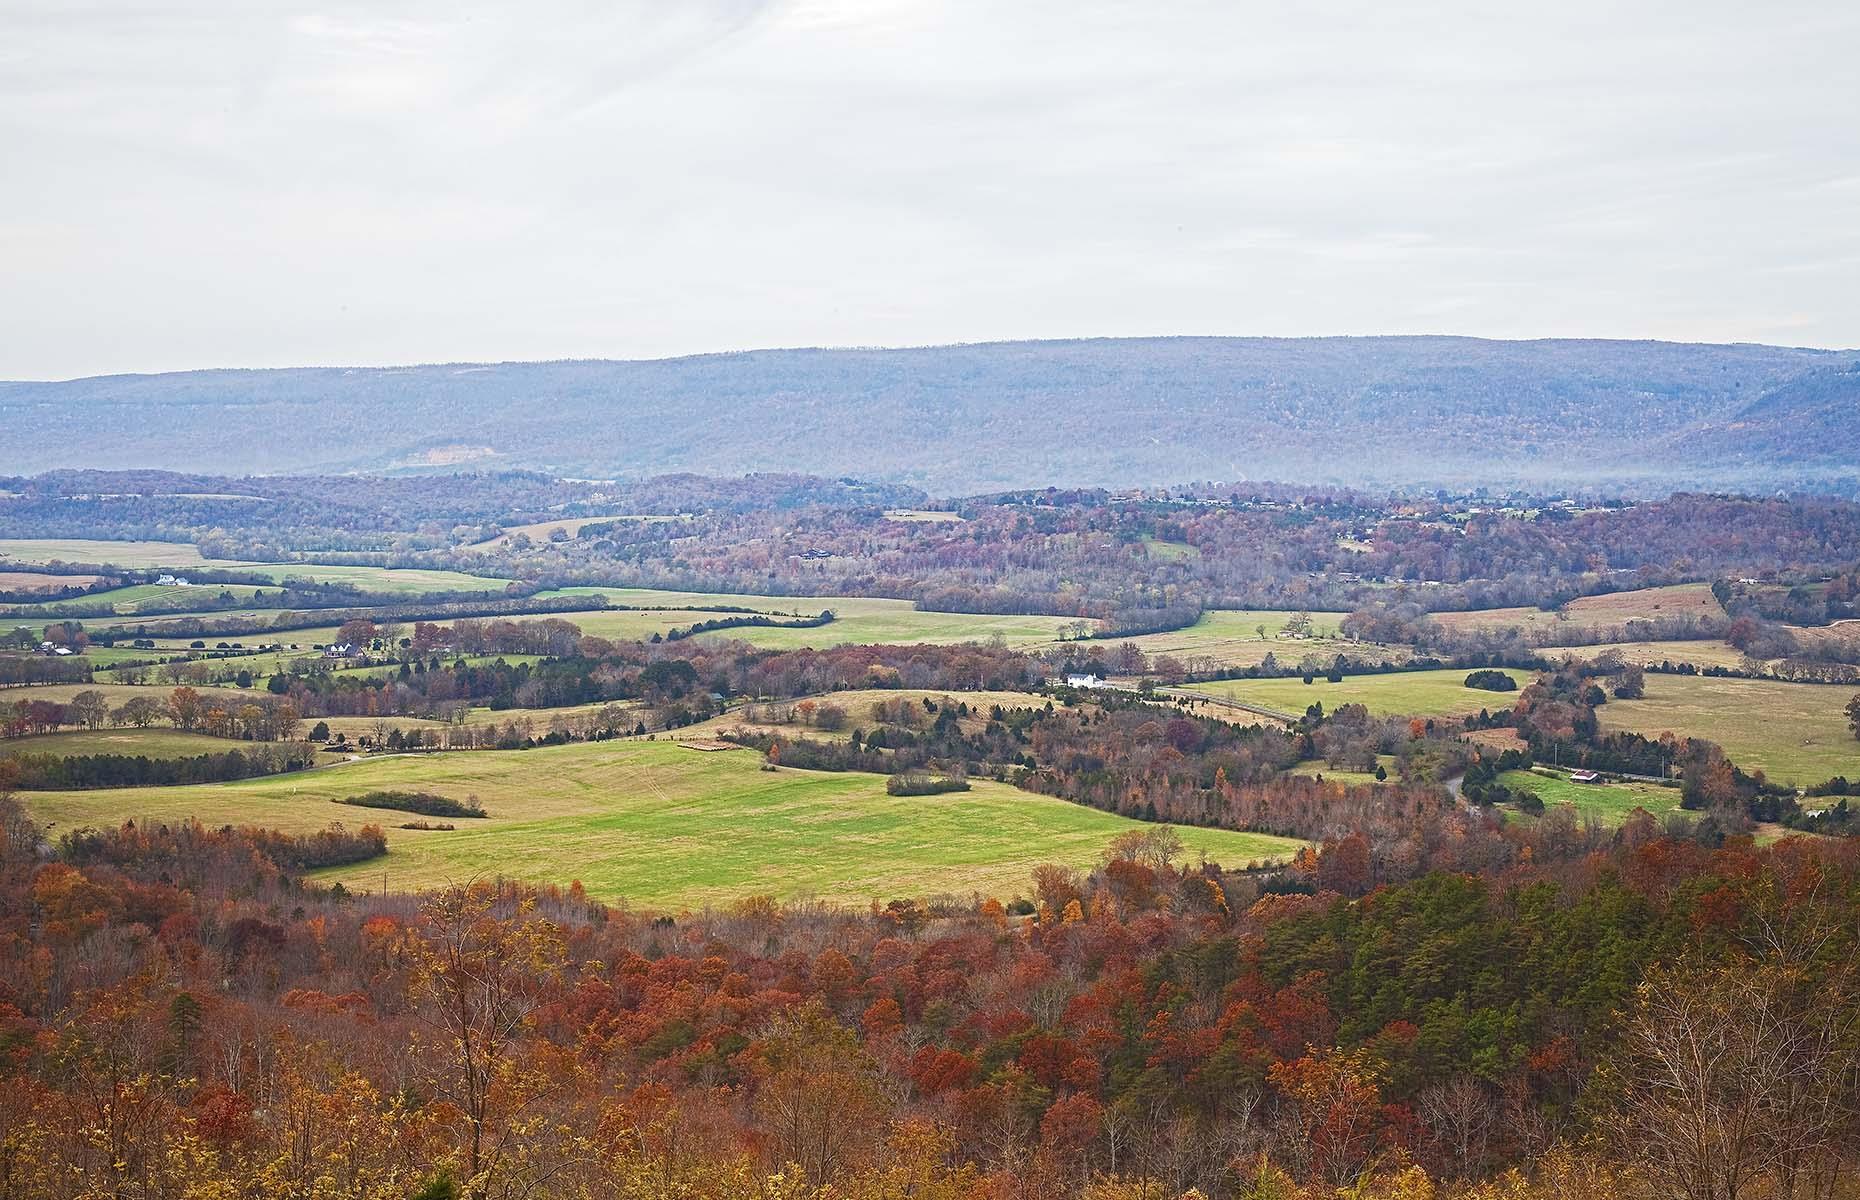 <p>Running through the three counties within the Sequatchie Valley (pictured), this scenic byway extends north along US 127 through Crossville, eventually joining up with I-40. Framed on either side by the Cumberland Plateau and Walden's Ridge, the valley is a top spot for outdoor recreation as there are four state parks, two state natural areas and three state forests to discover in the byway counties.</p>  <p><a href="https://www.loveexploring.com/galleries/86372/the-most-beautiful-state-park-in-every-us-state?page=1"><strong>Find out the most beautiful state park in your state</strong></a></p>